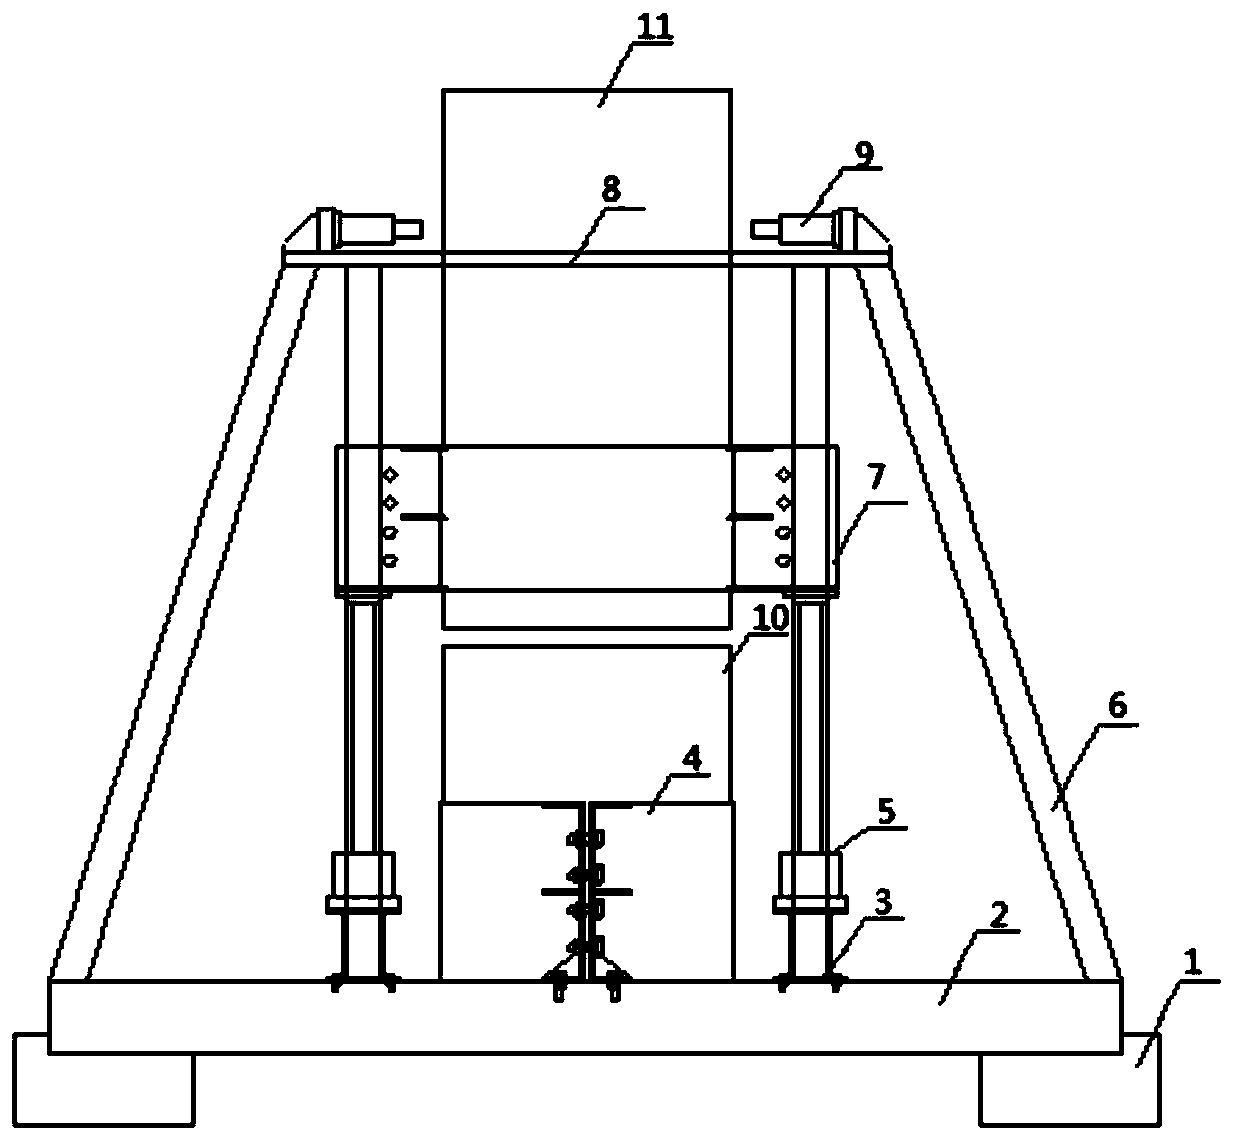 A centering positioning device for connecting piles